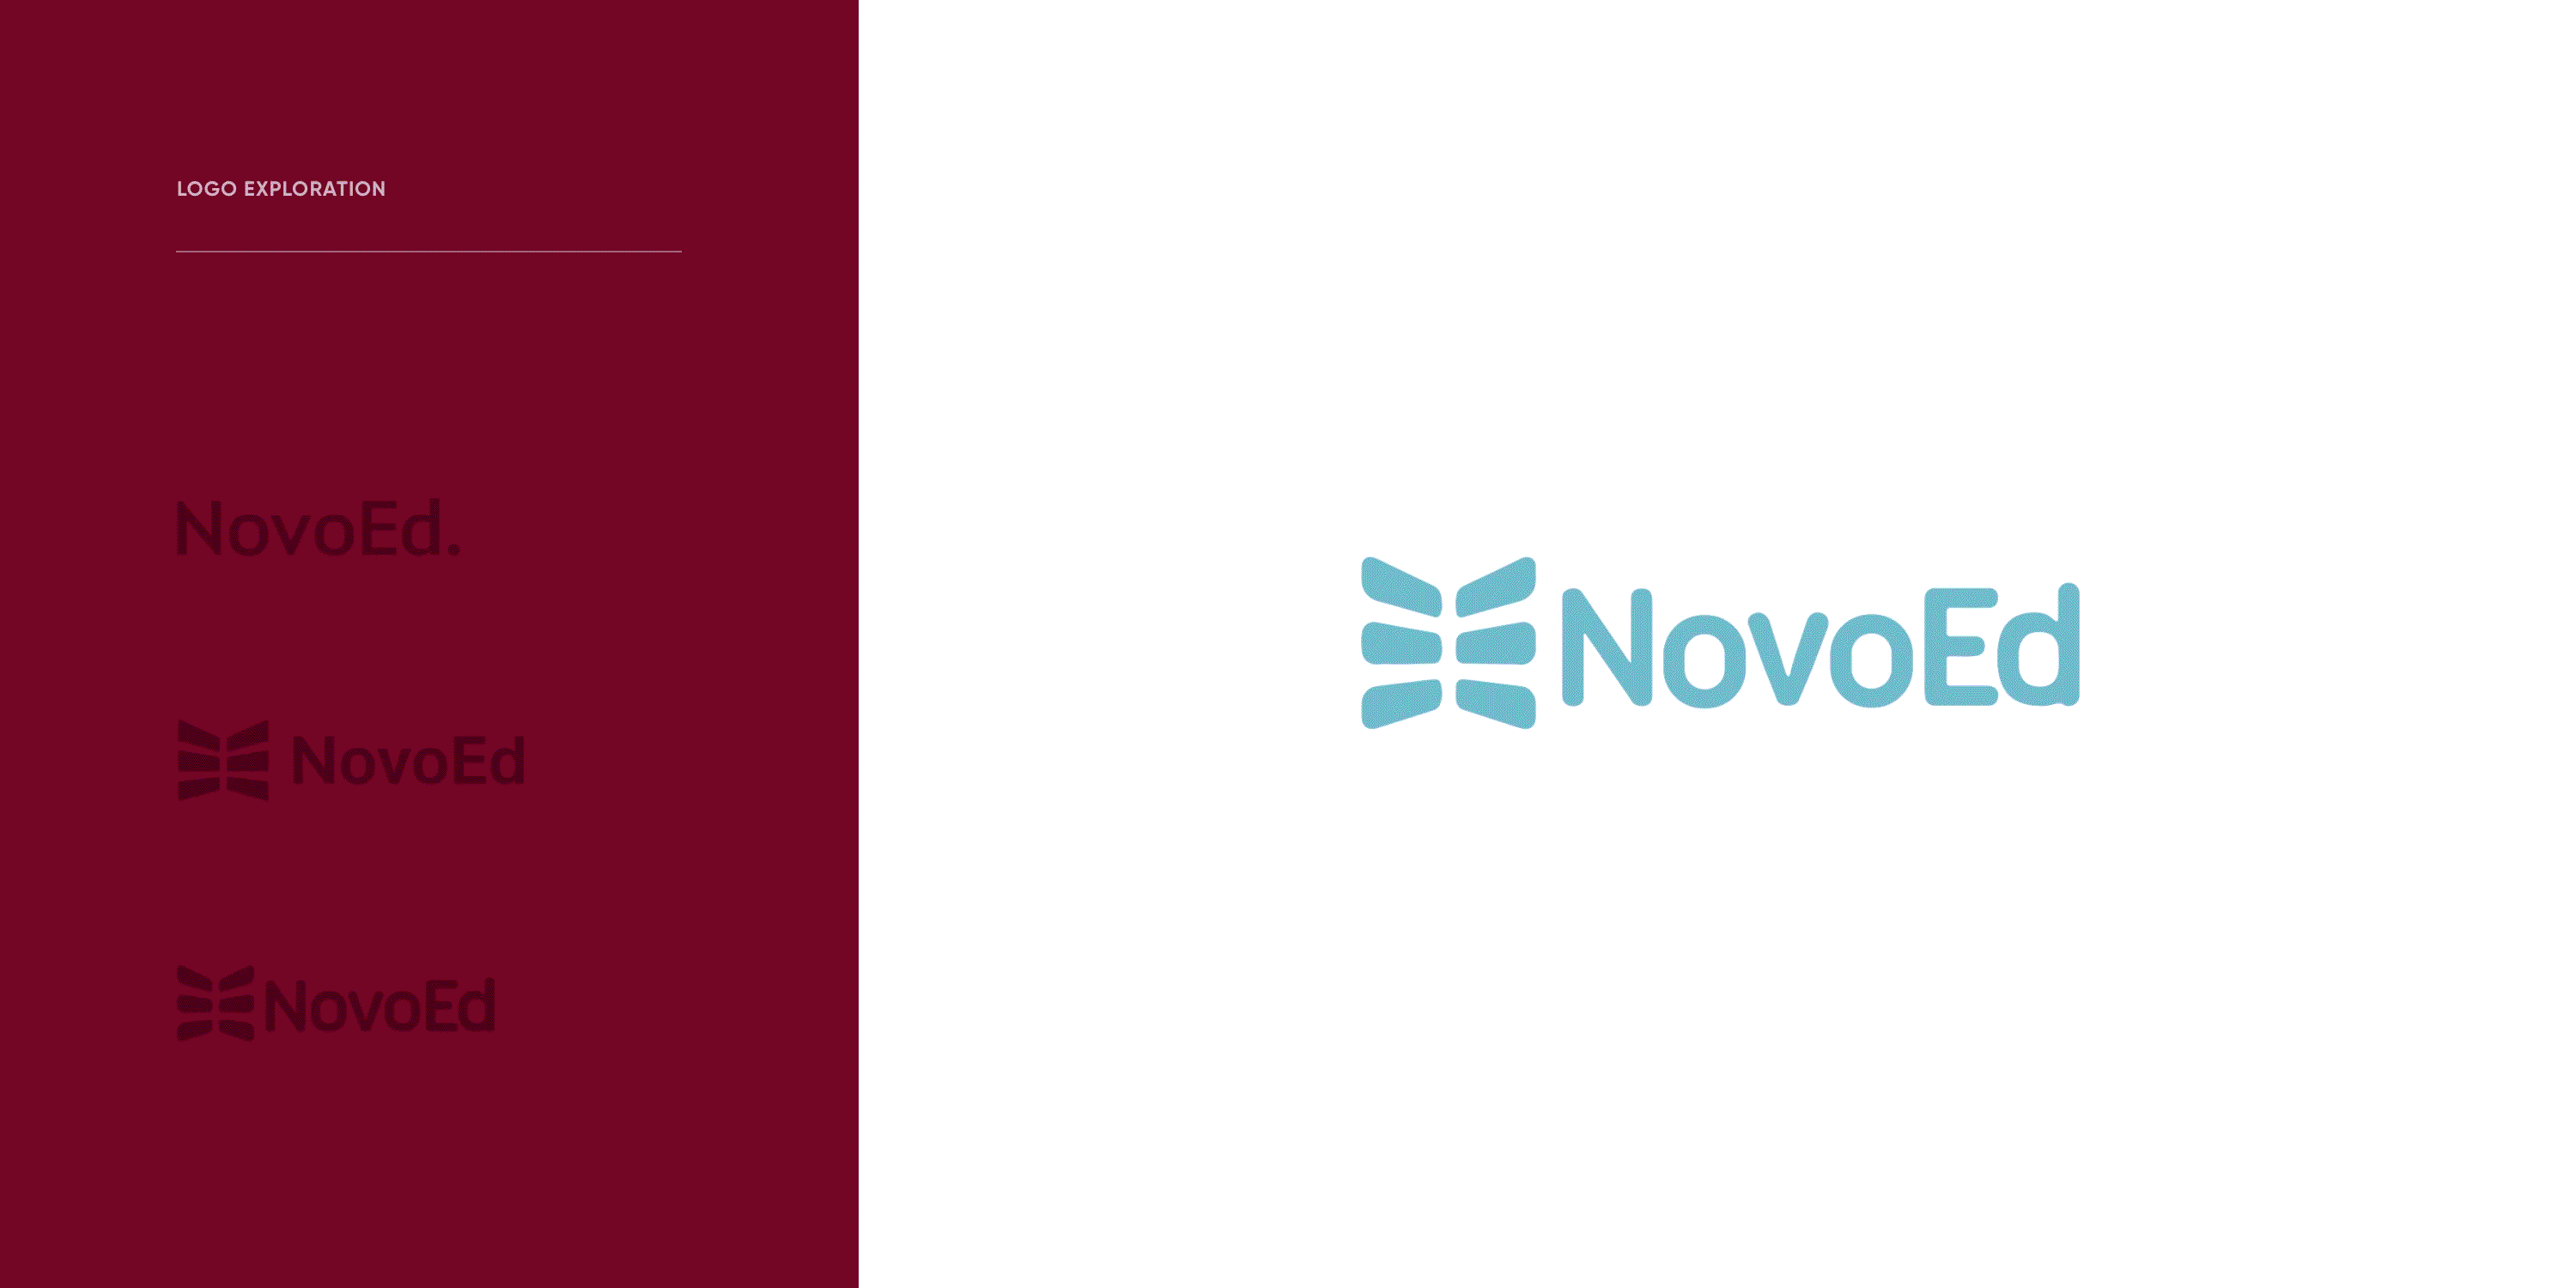 a motion graphic showing the evolution of concepts for NovoEd's logo treatment 